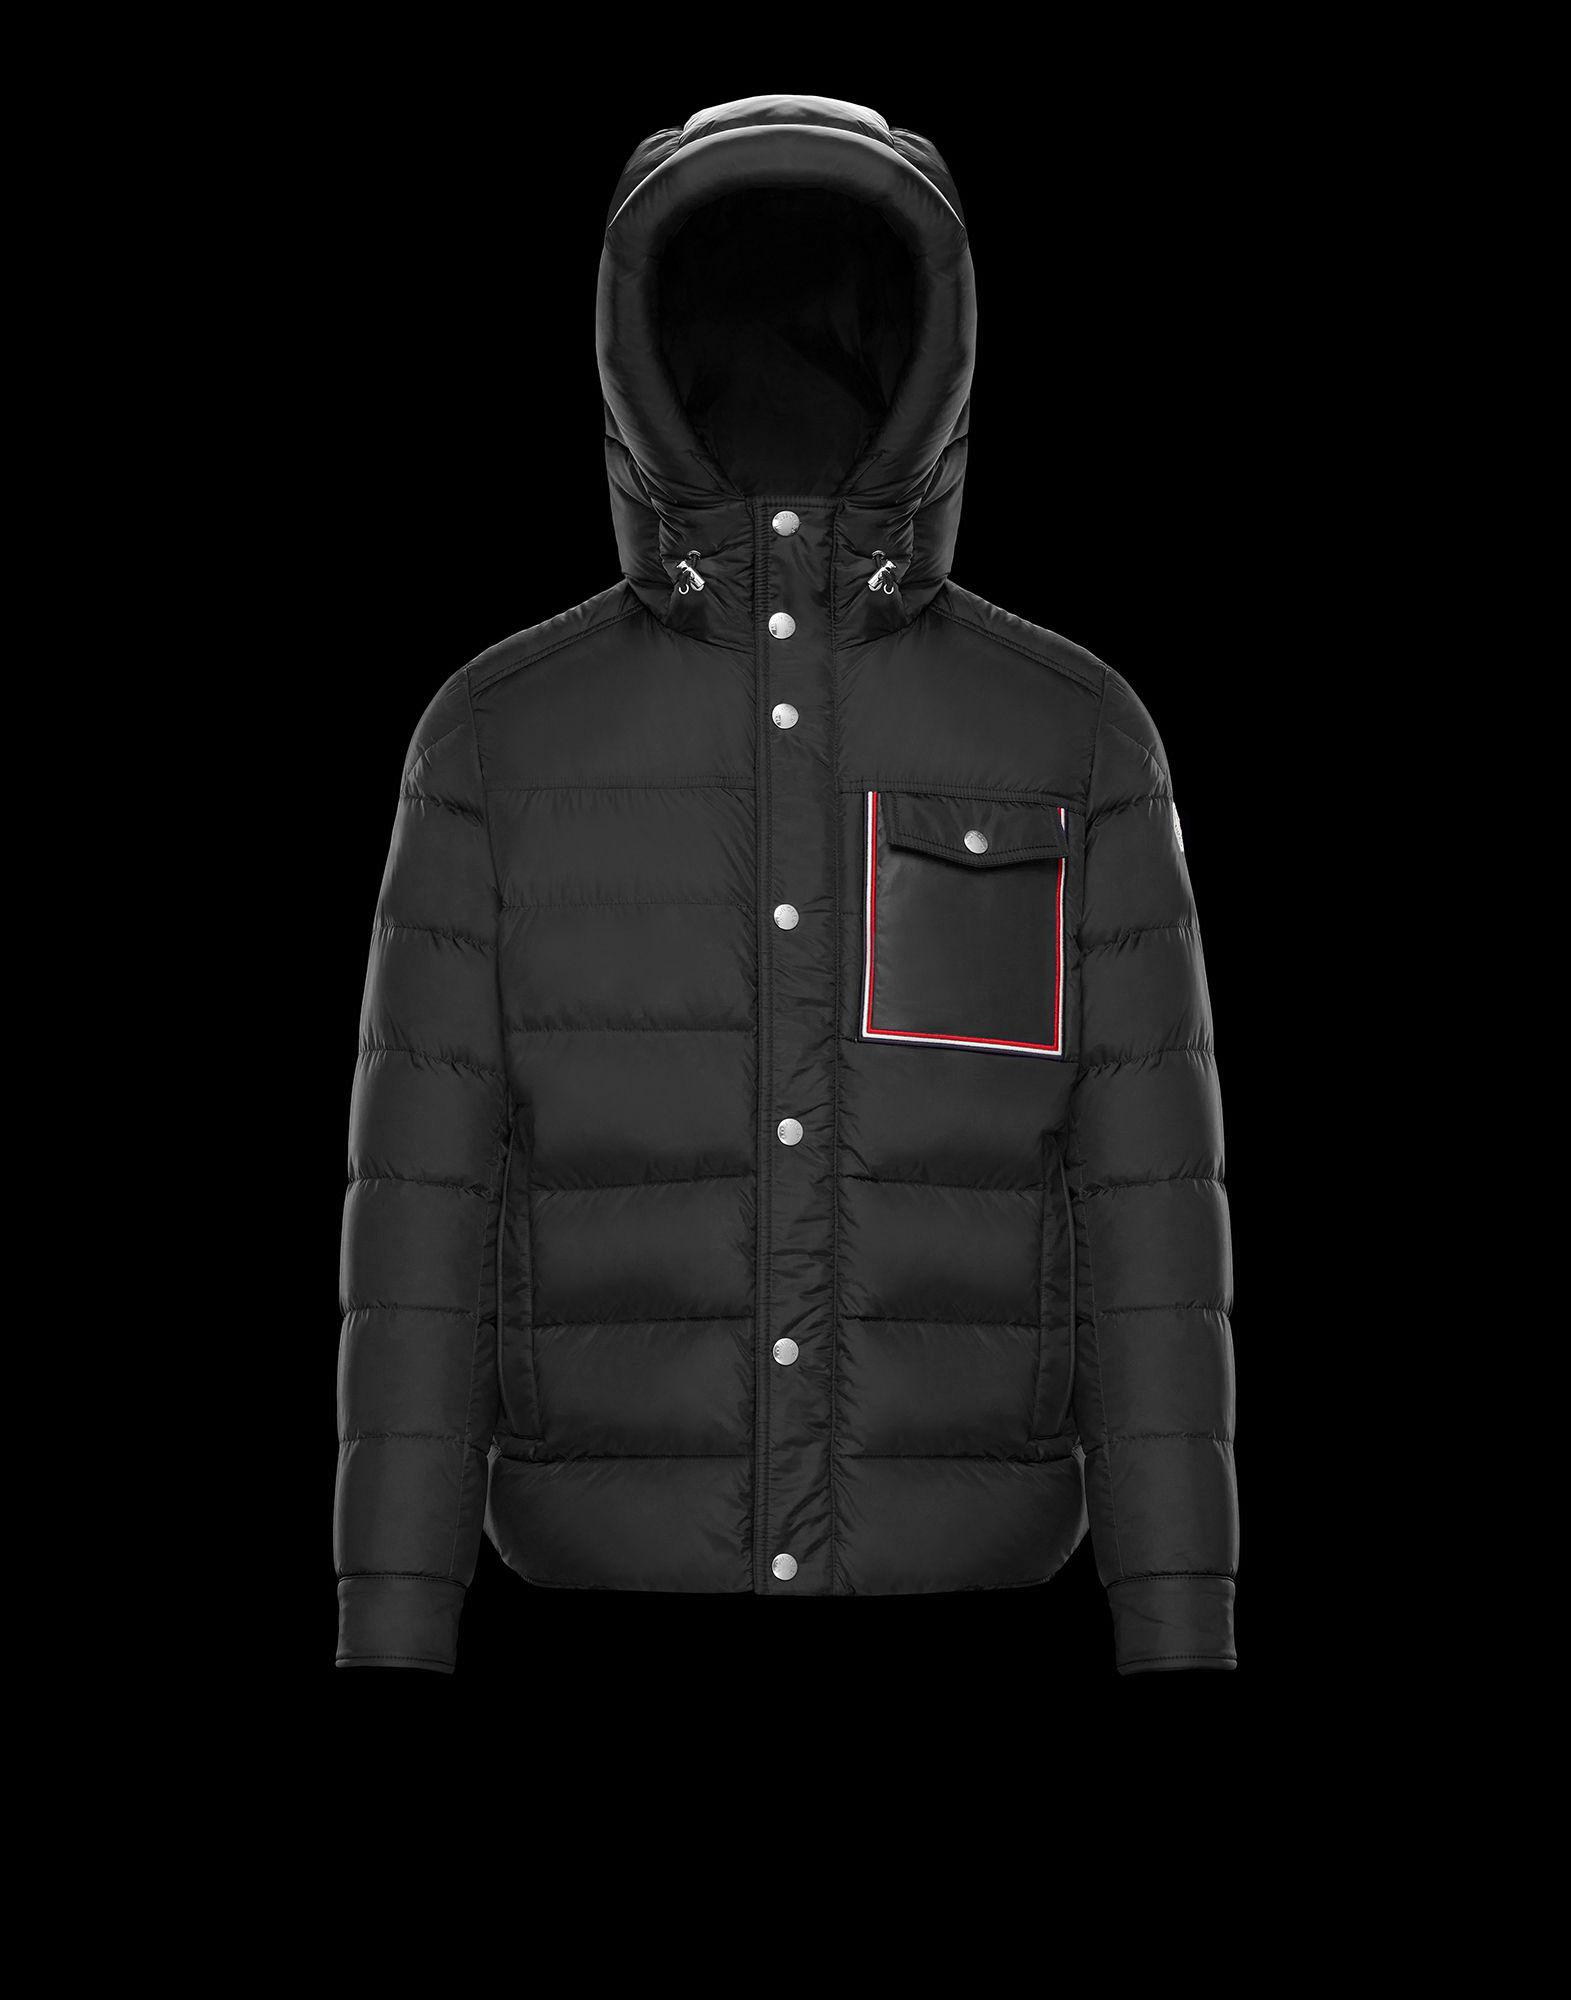 prevot moncler,OFF 63%,www.concordehotels.com.tr